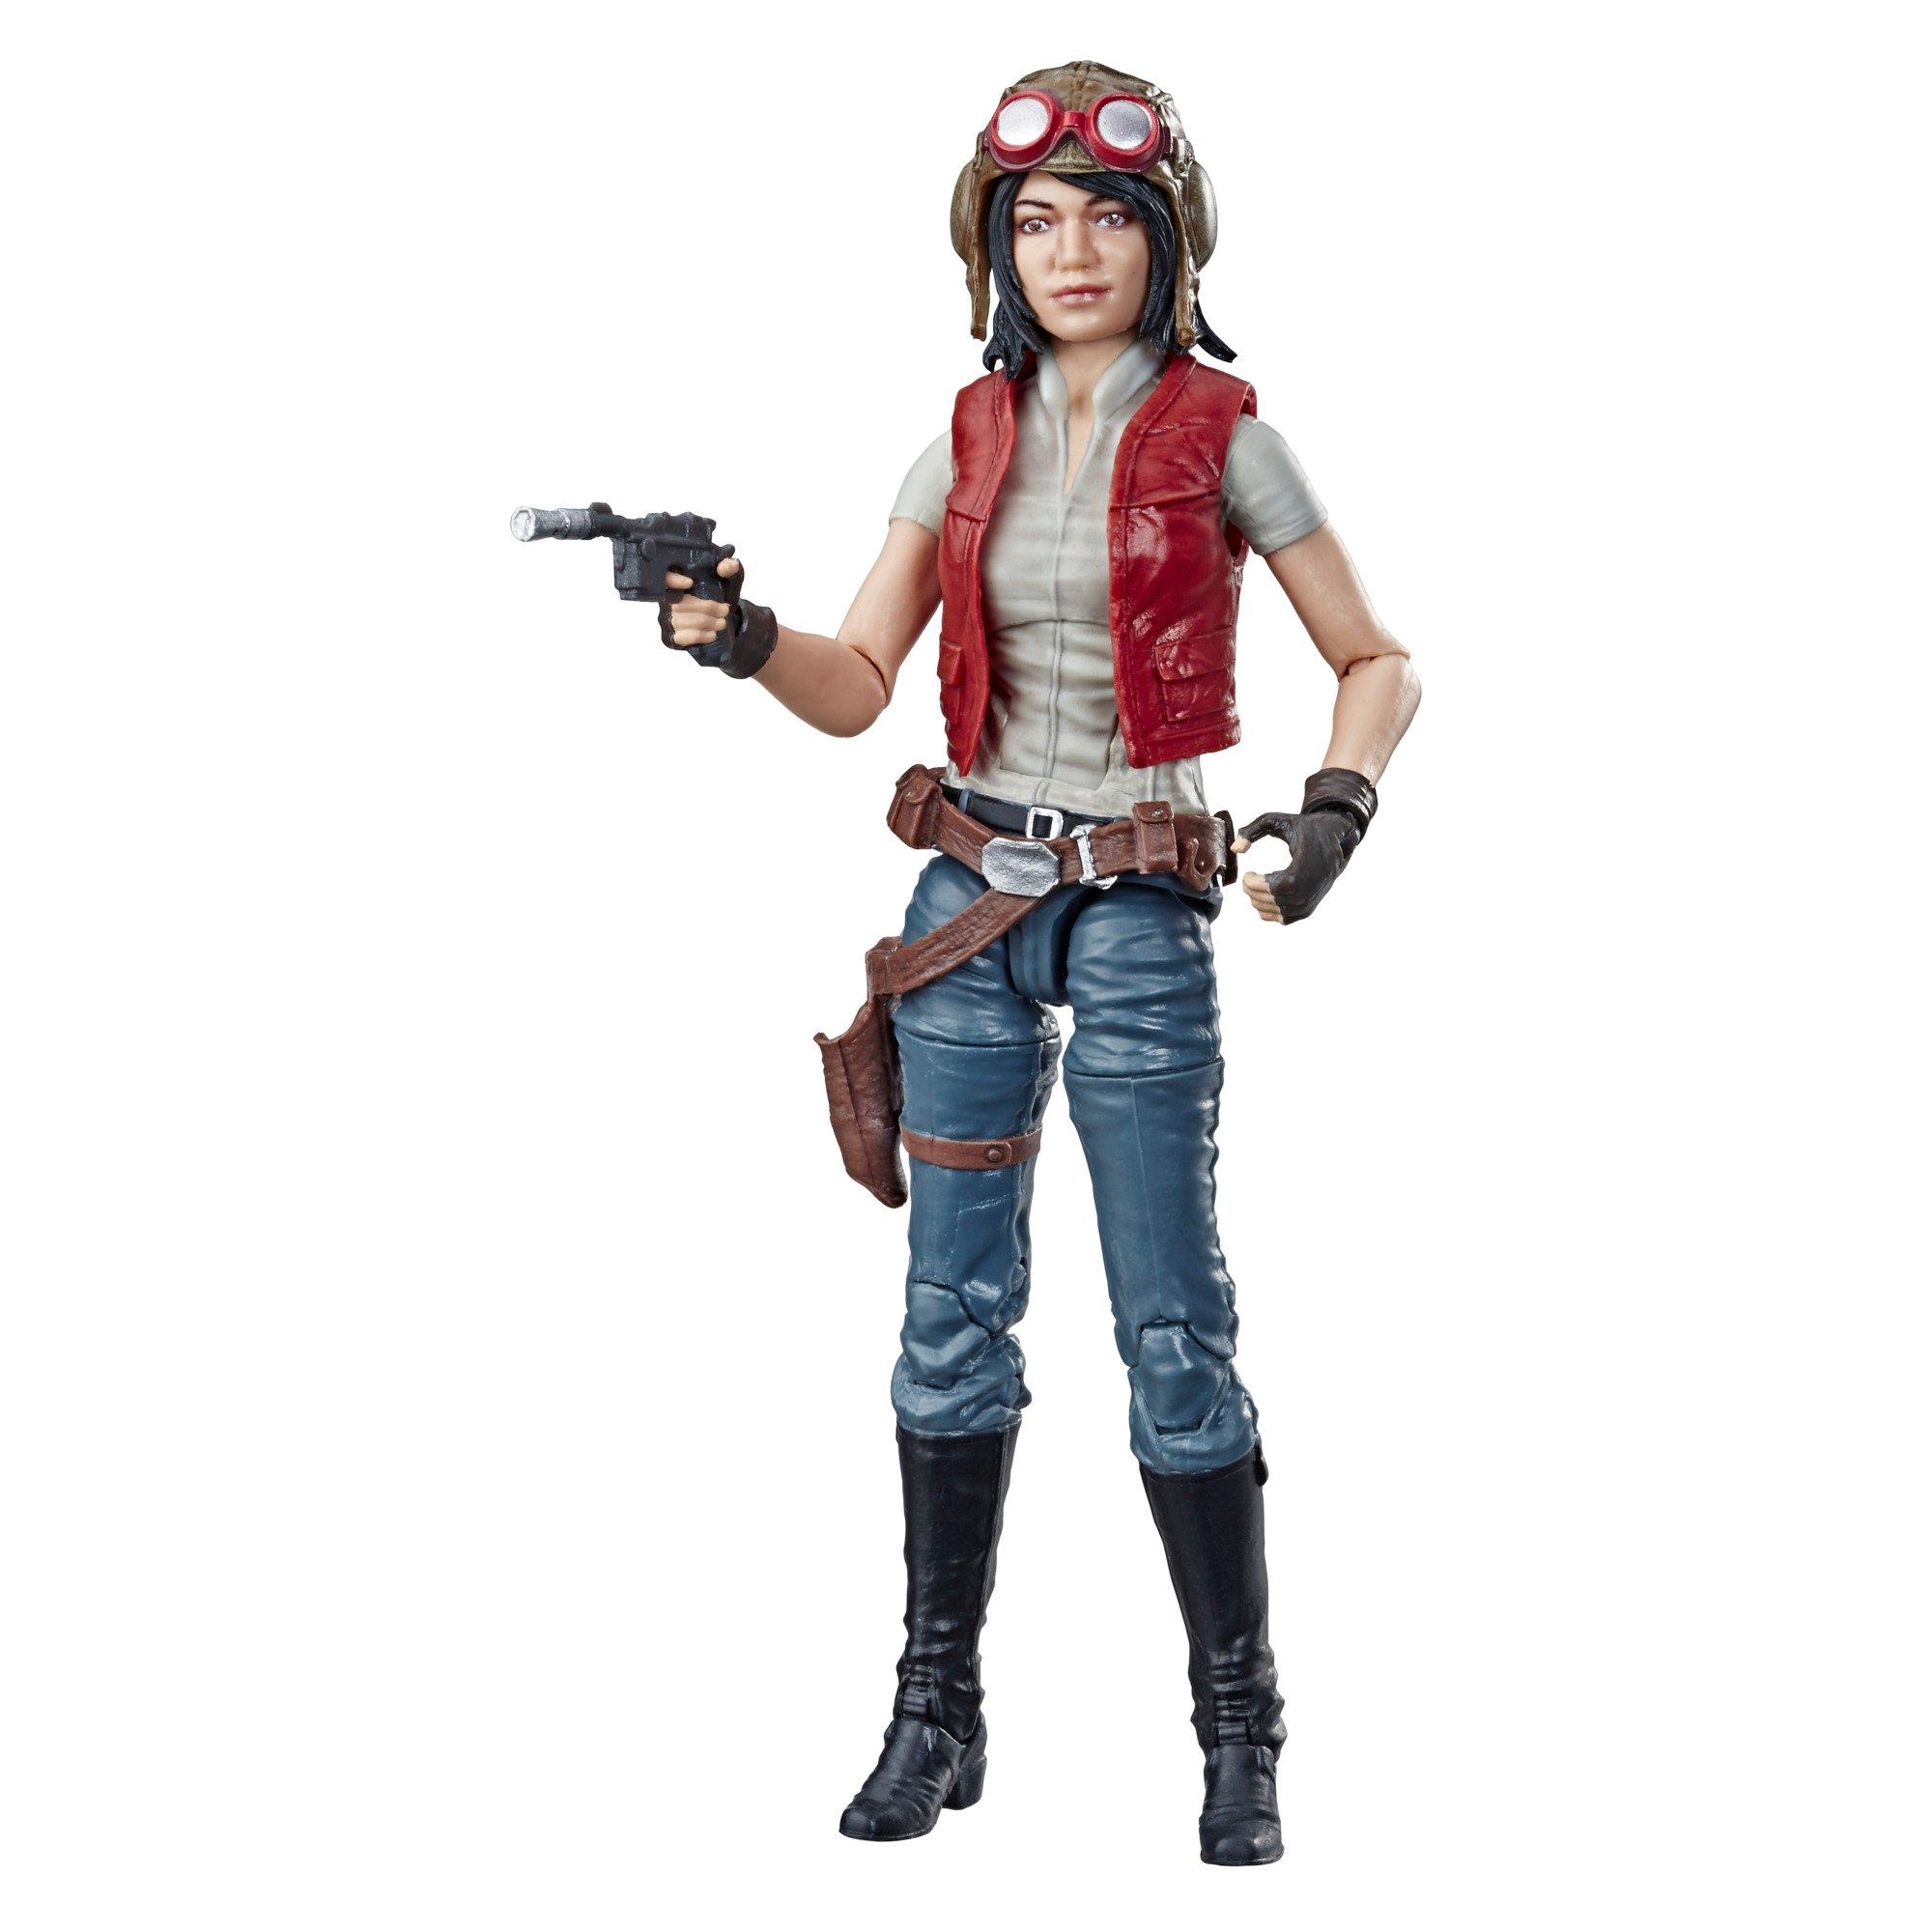 doctor aphra action figure